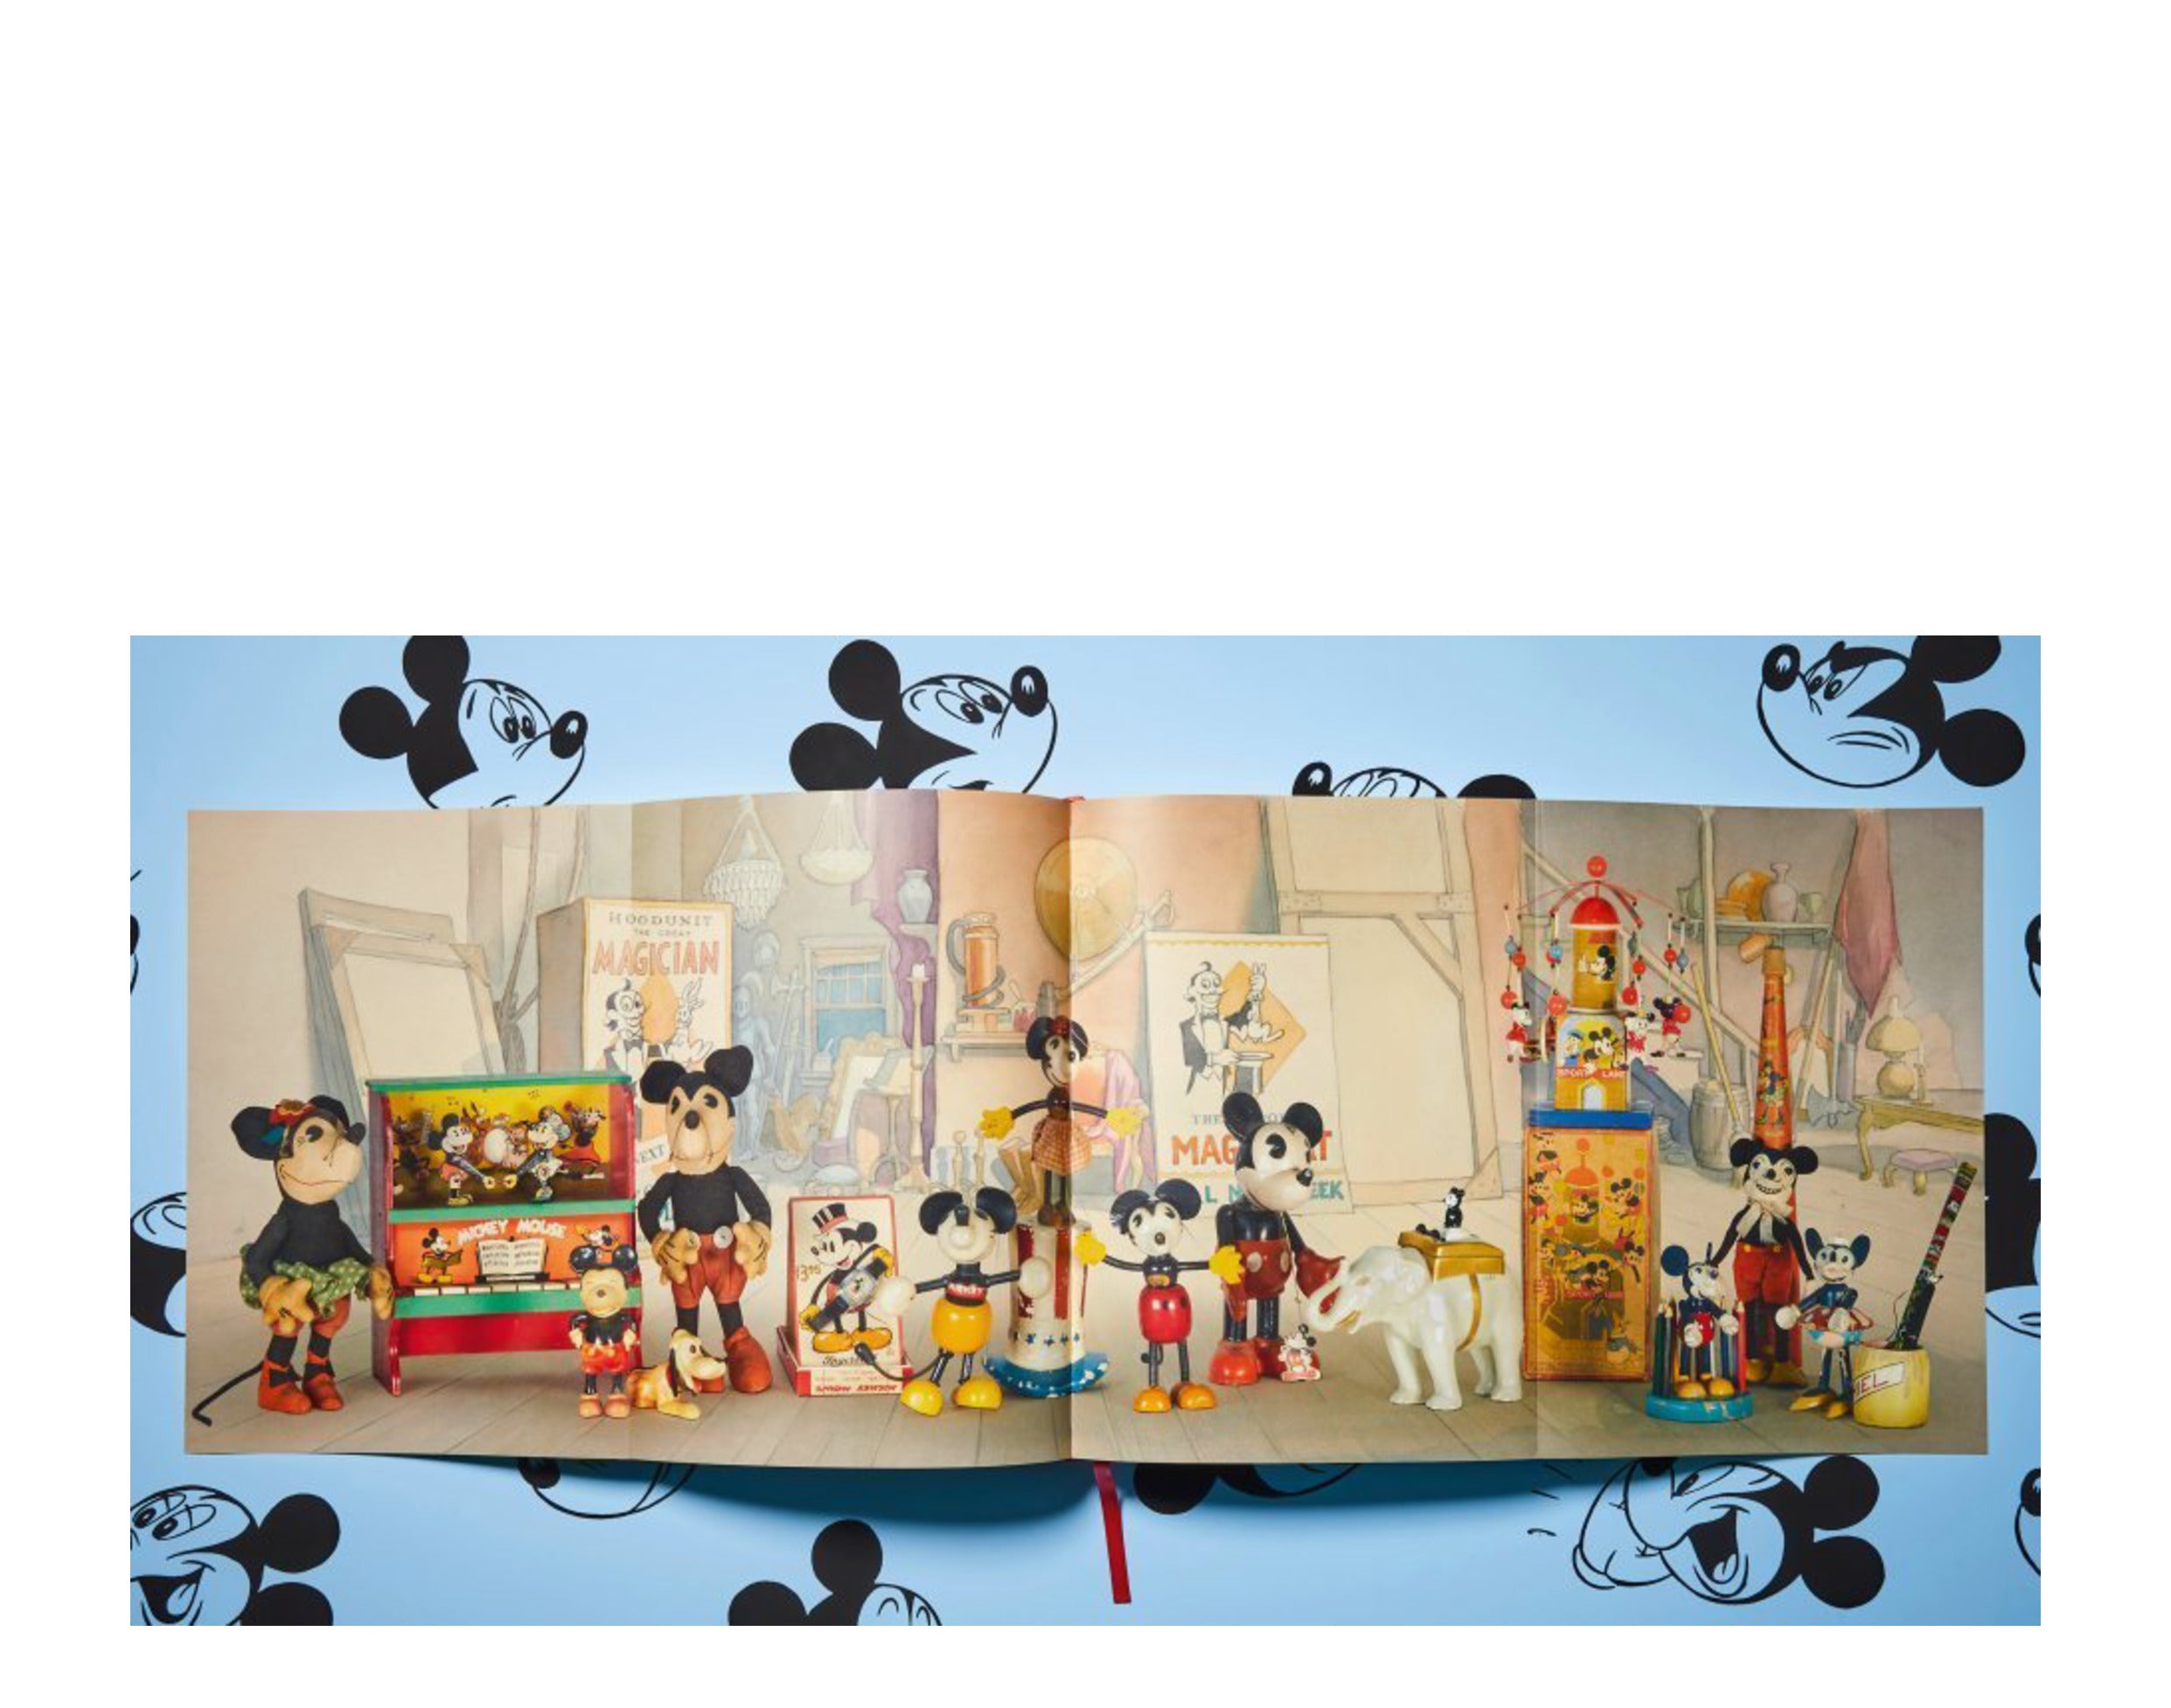 mickey mouse history